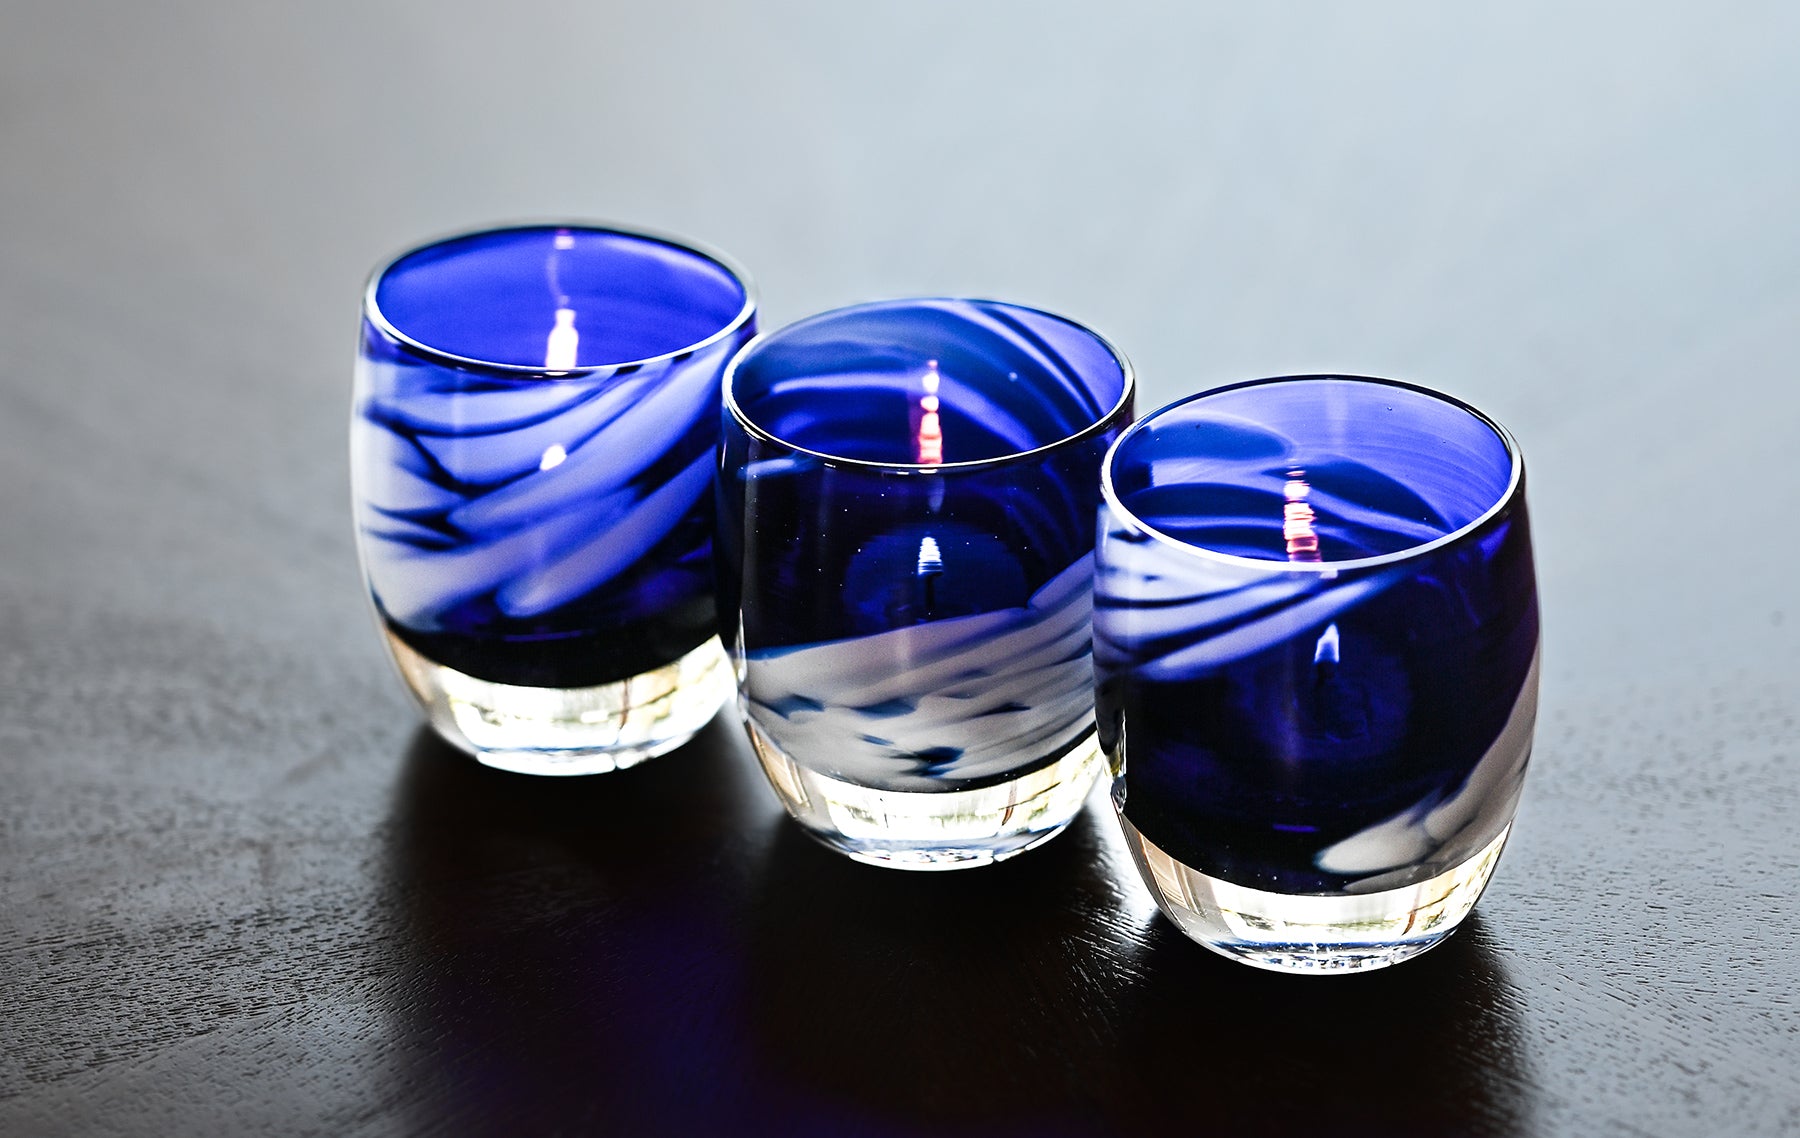 free bird is an electric blue and white patterned hand-blown glass candle holder - a set of 3 sit on a black table lit. 